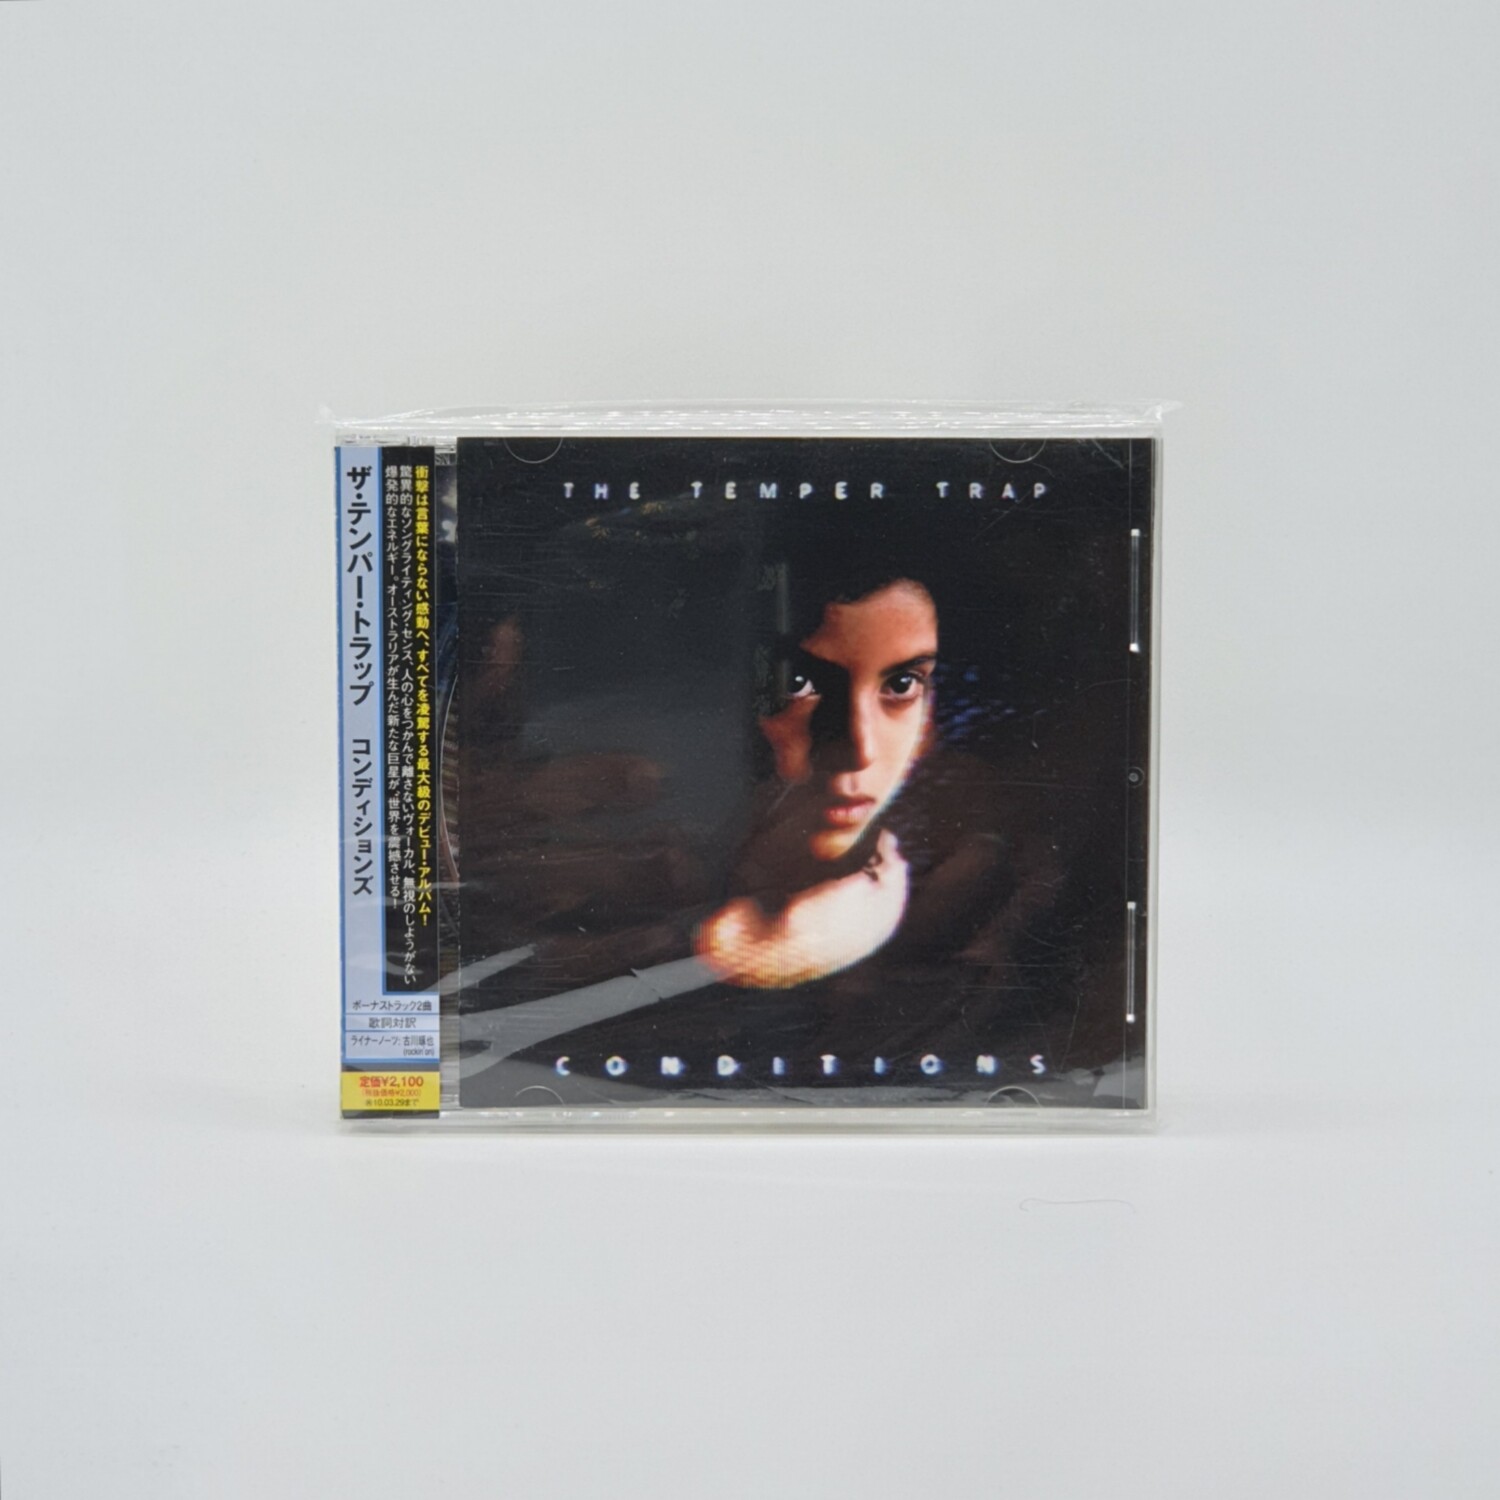 [USED] THE TEMPER TRAP -CONDITIONS- CD (JAPAN PRESS)